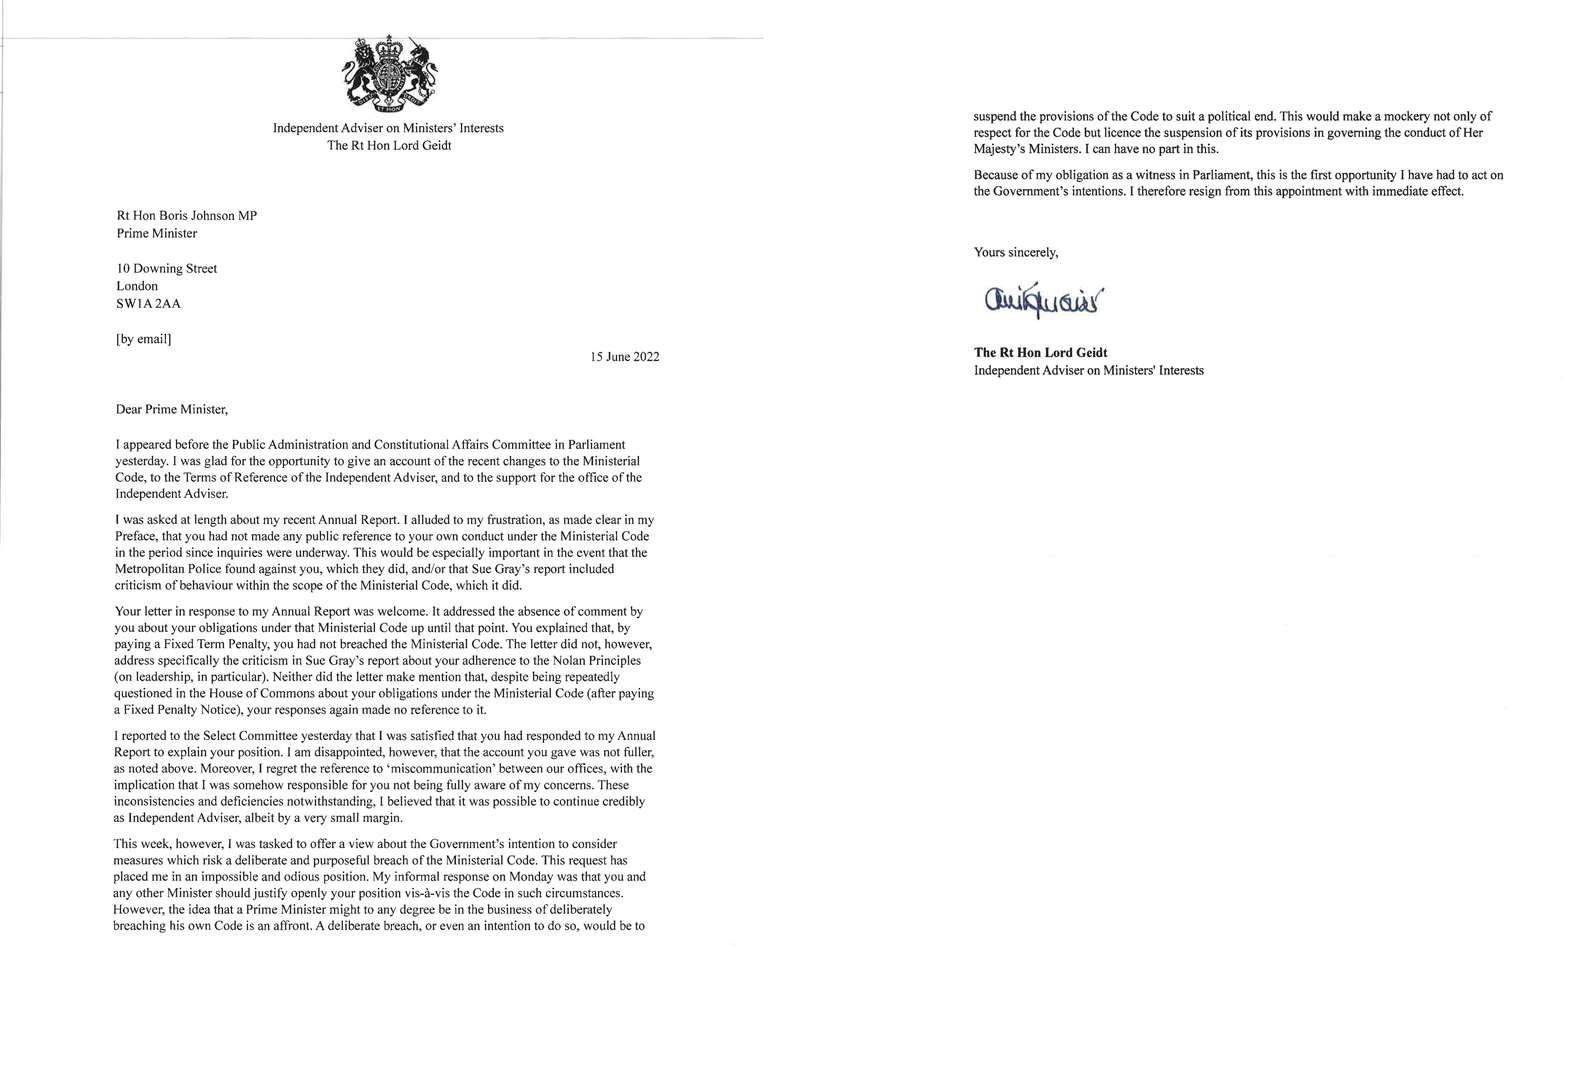 Lord Geidt’s resignation letter (Downing Street/PA)